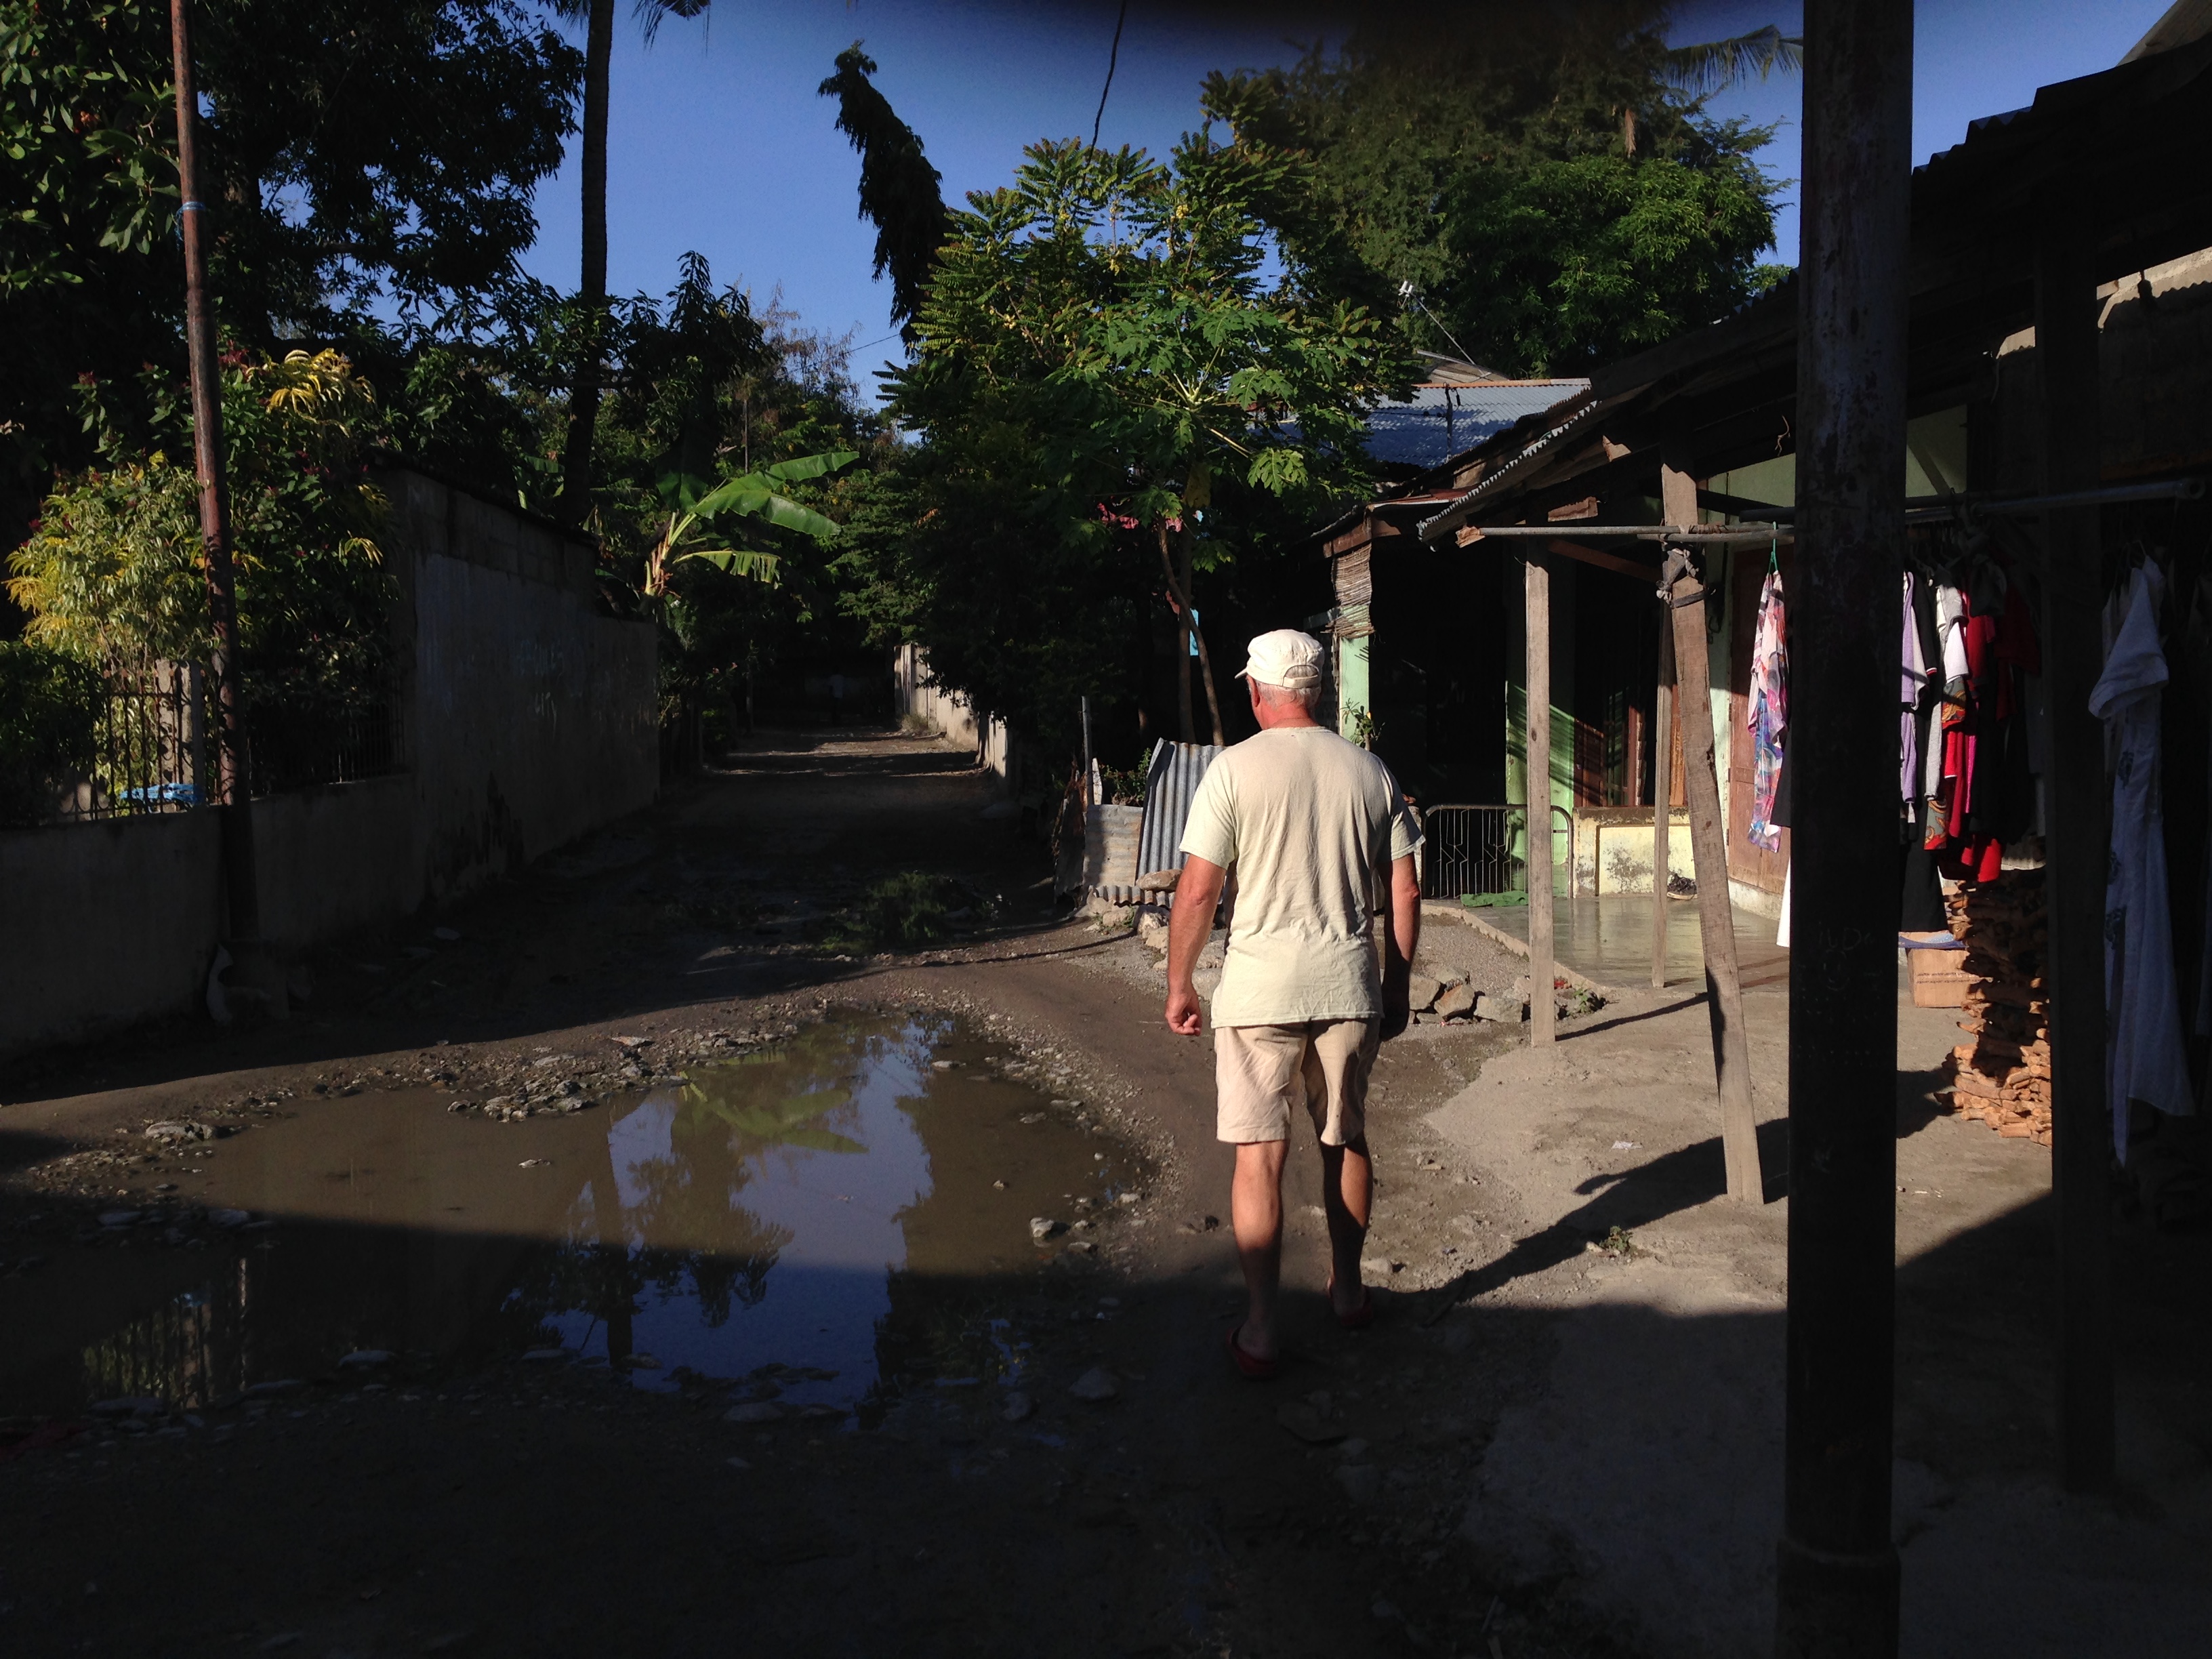 Dave walking the backstreets of Dili. Photo: Tim Holt